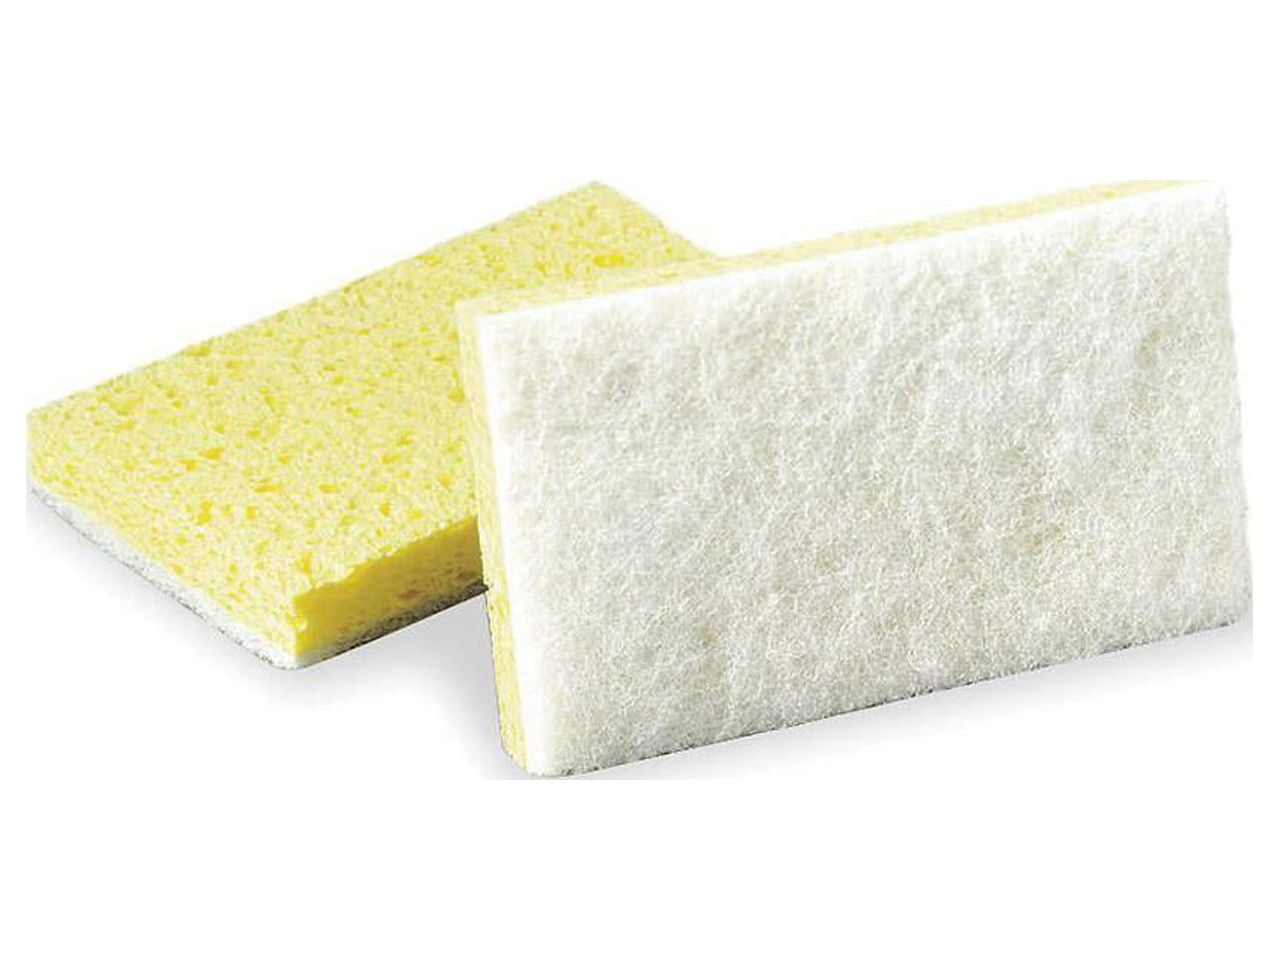 24 Pcs Sponges For Dishes, Non-scratch Scrub Sponges With Abrasive Scour  Pads, 3.94inch X 2.8inch X